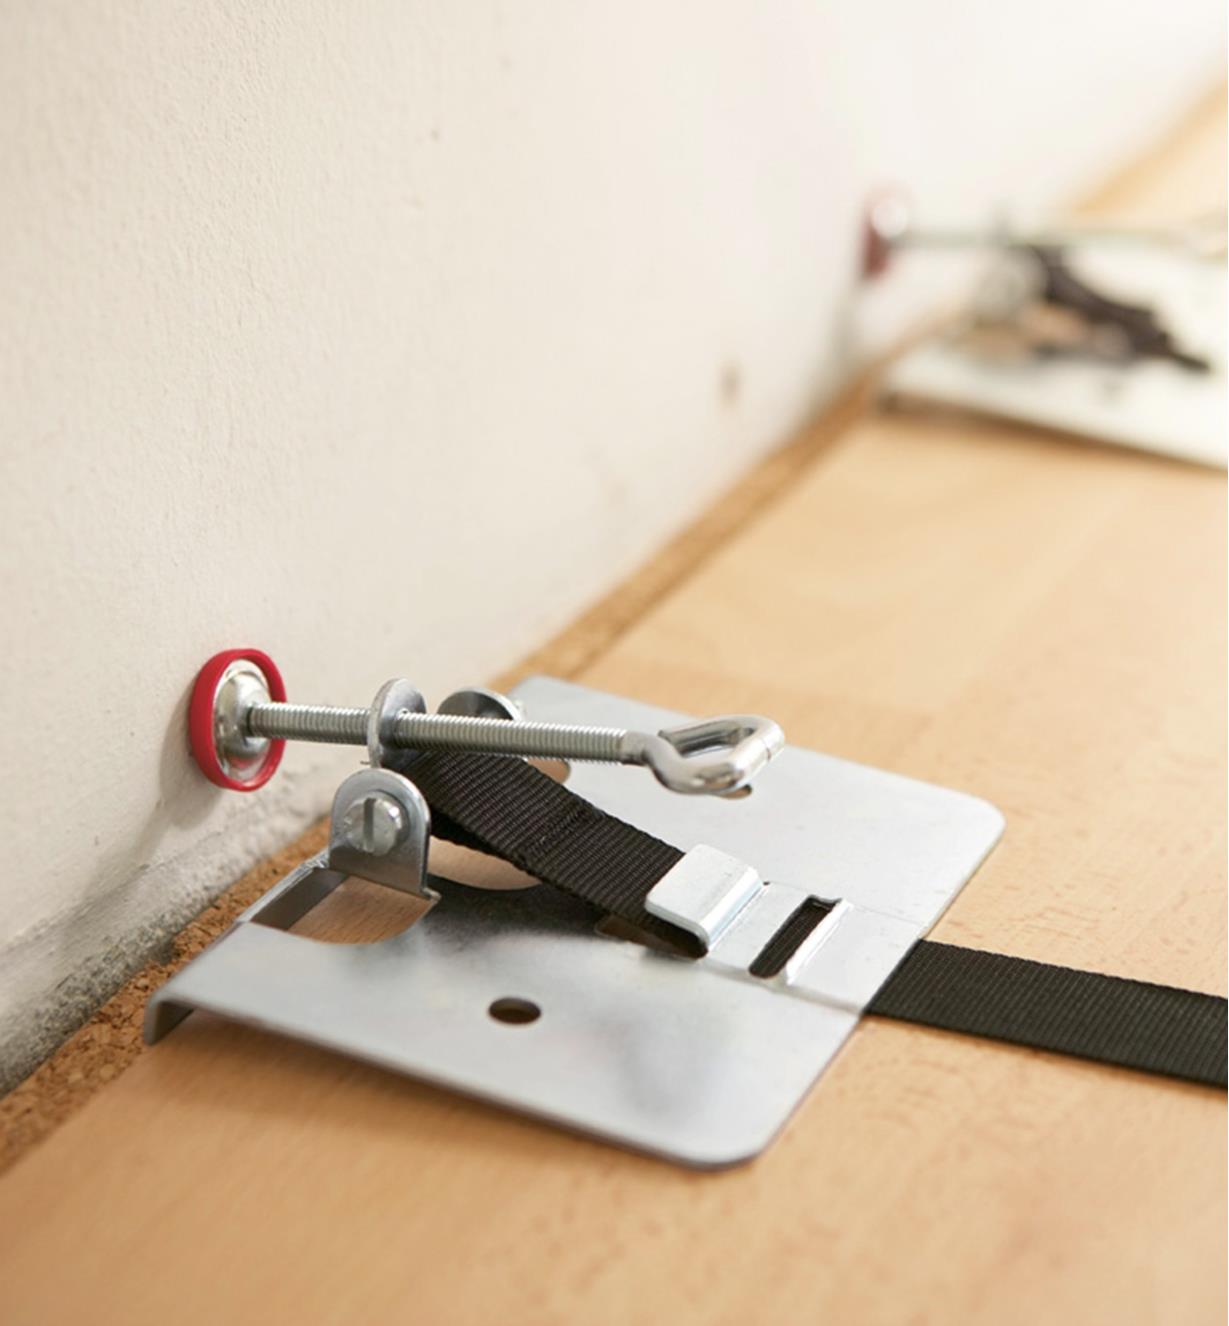 A Bessey flooring clamp strap used to offset rows of flooring from a wall during installation